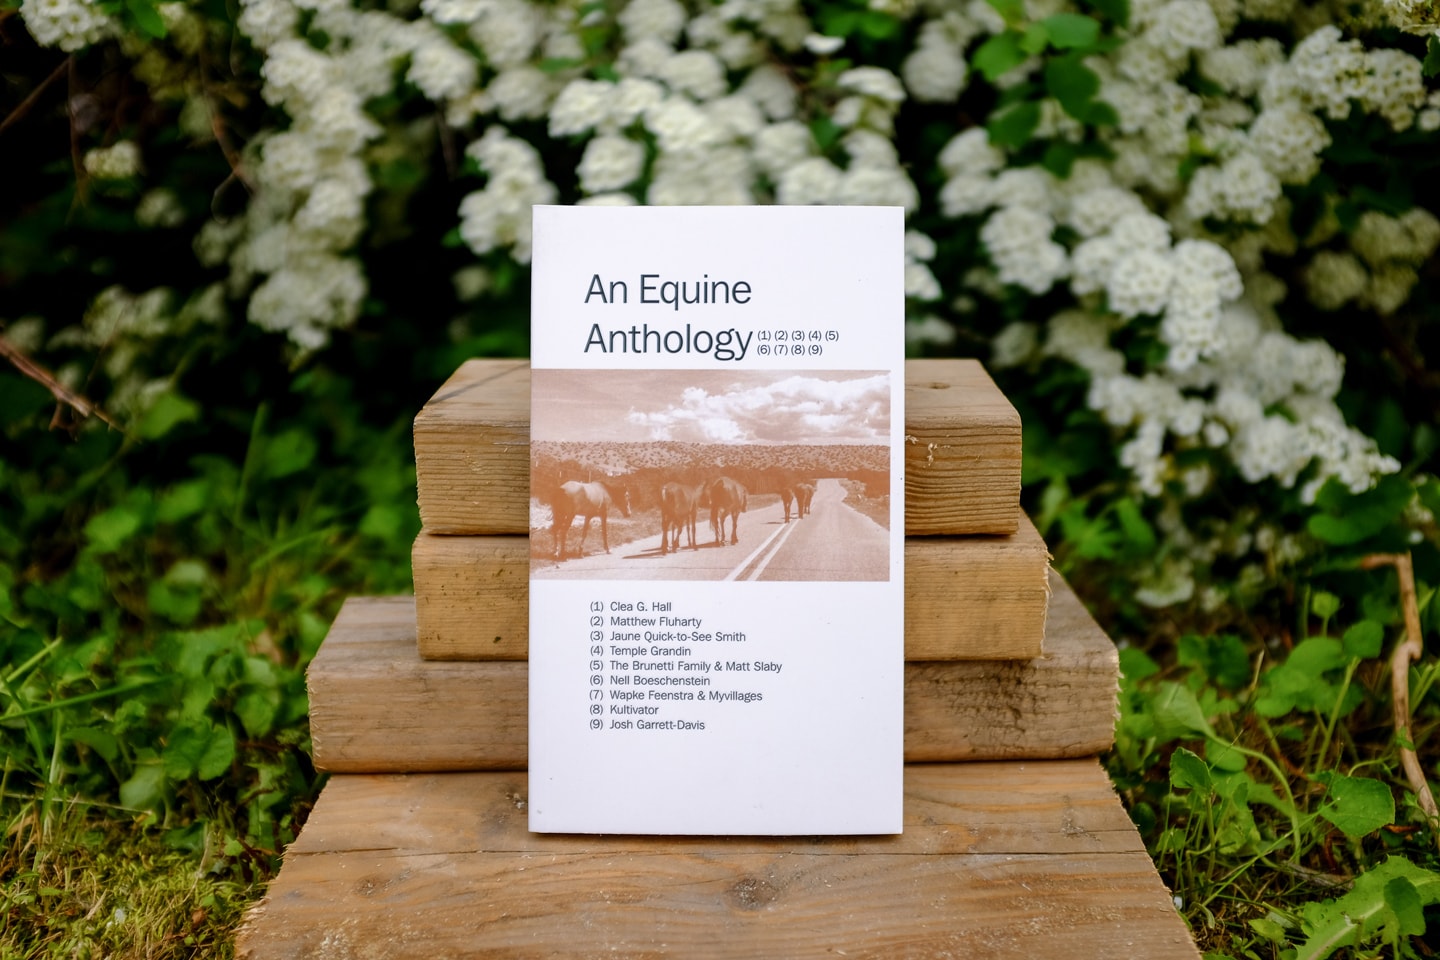 An Equine Anthology book